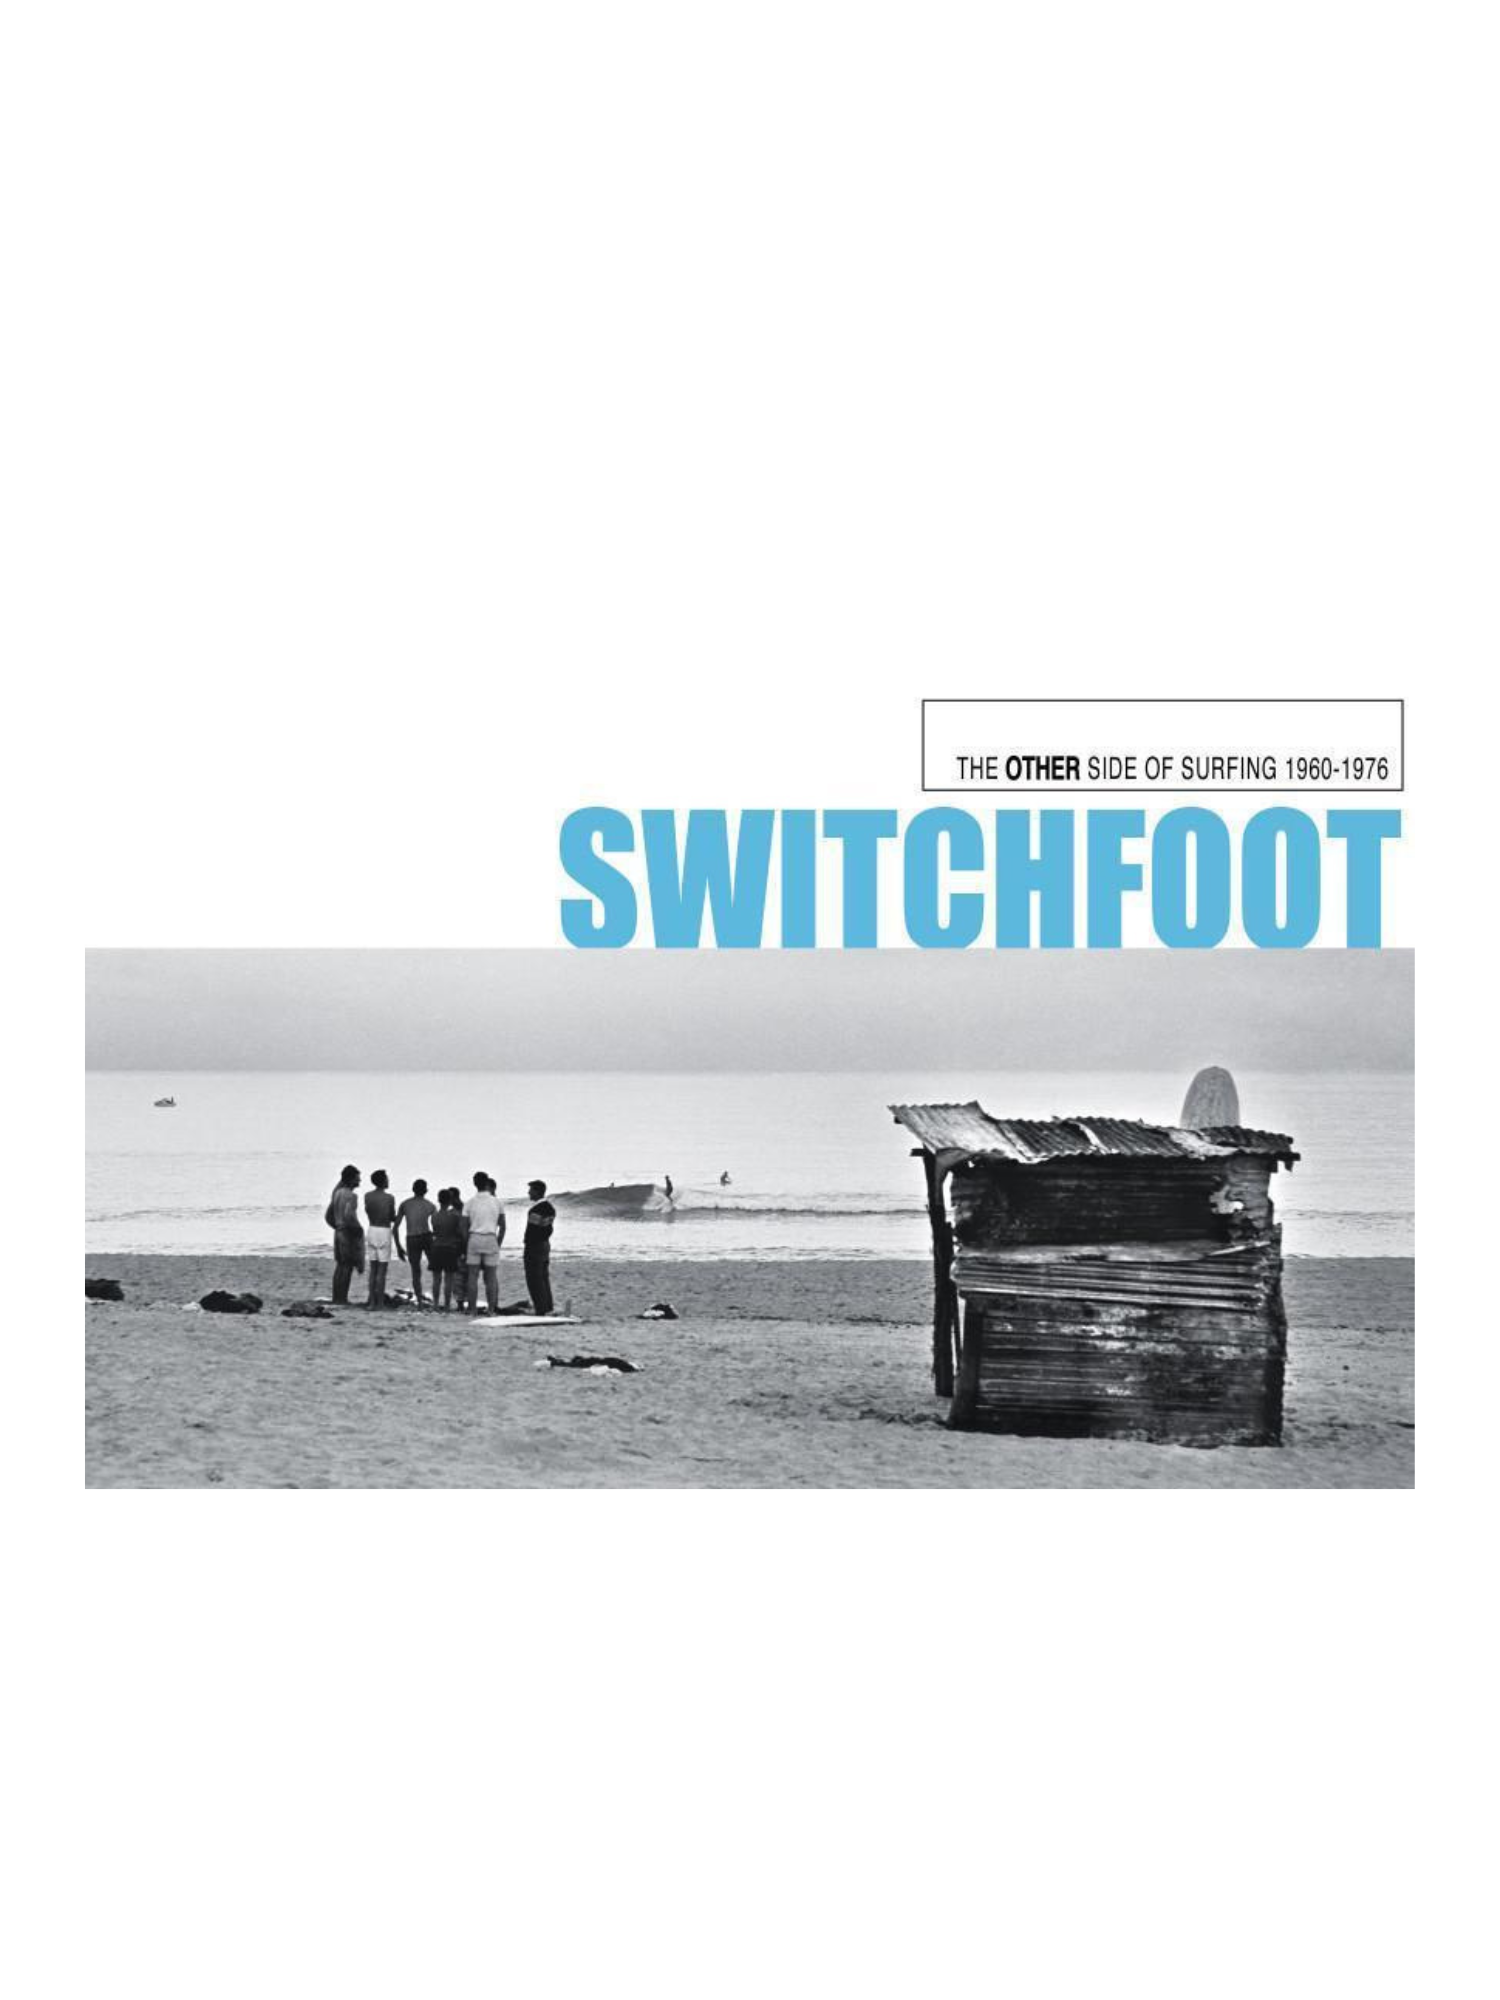 SWITCHFOOT - THE OTHER SIDE OF SURFING 1960-1976